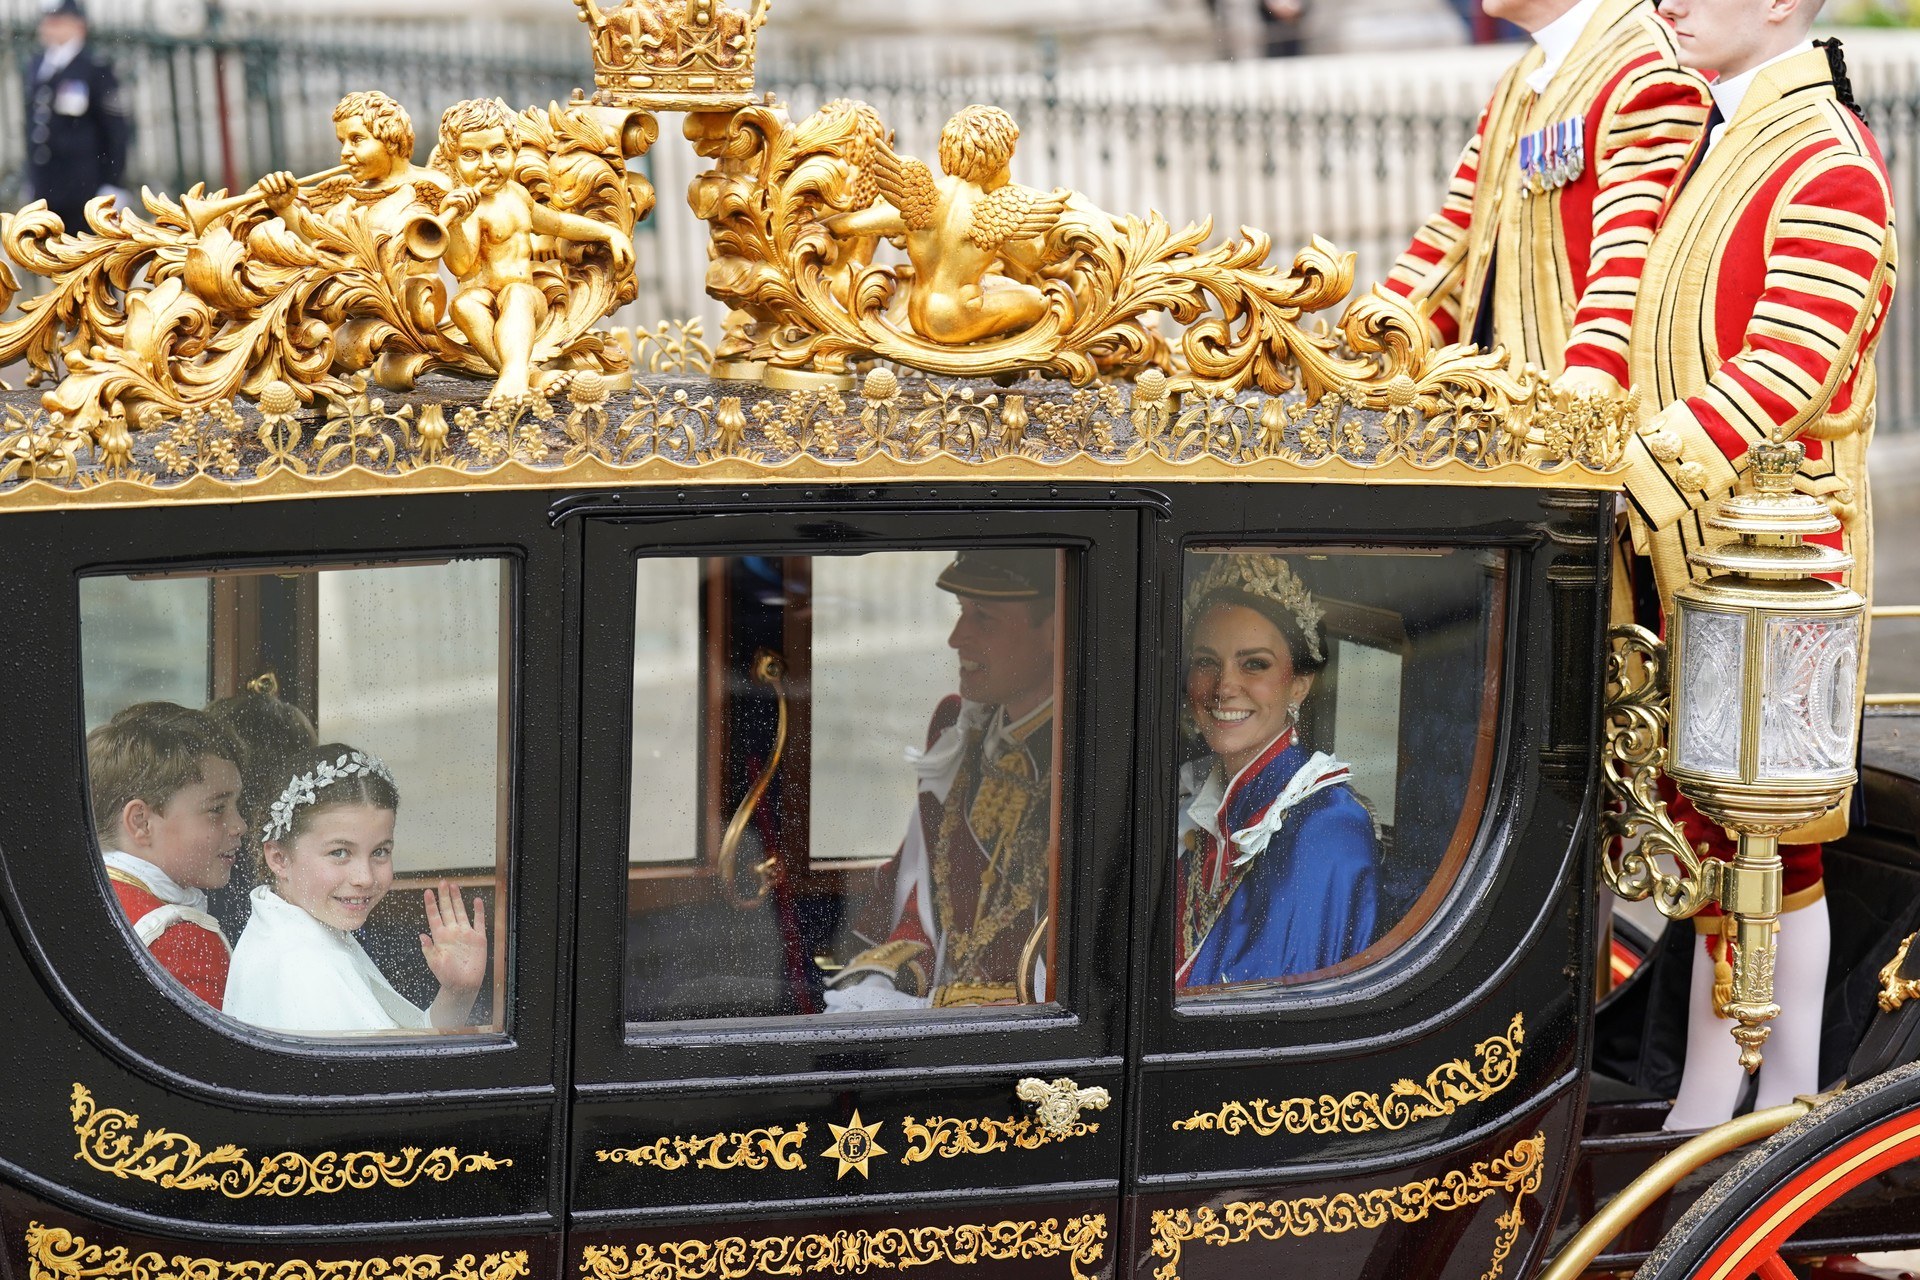 Prince George, Princess Charlotte and the Prince and Princess of Wales return to Buckingham Palace by coach following the coronation ceremony of King Charles III and Queen Camilla.